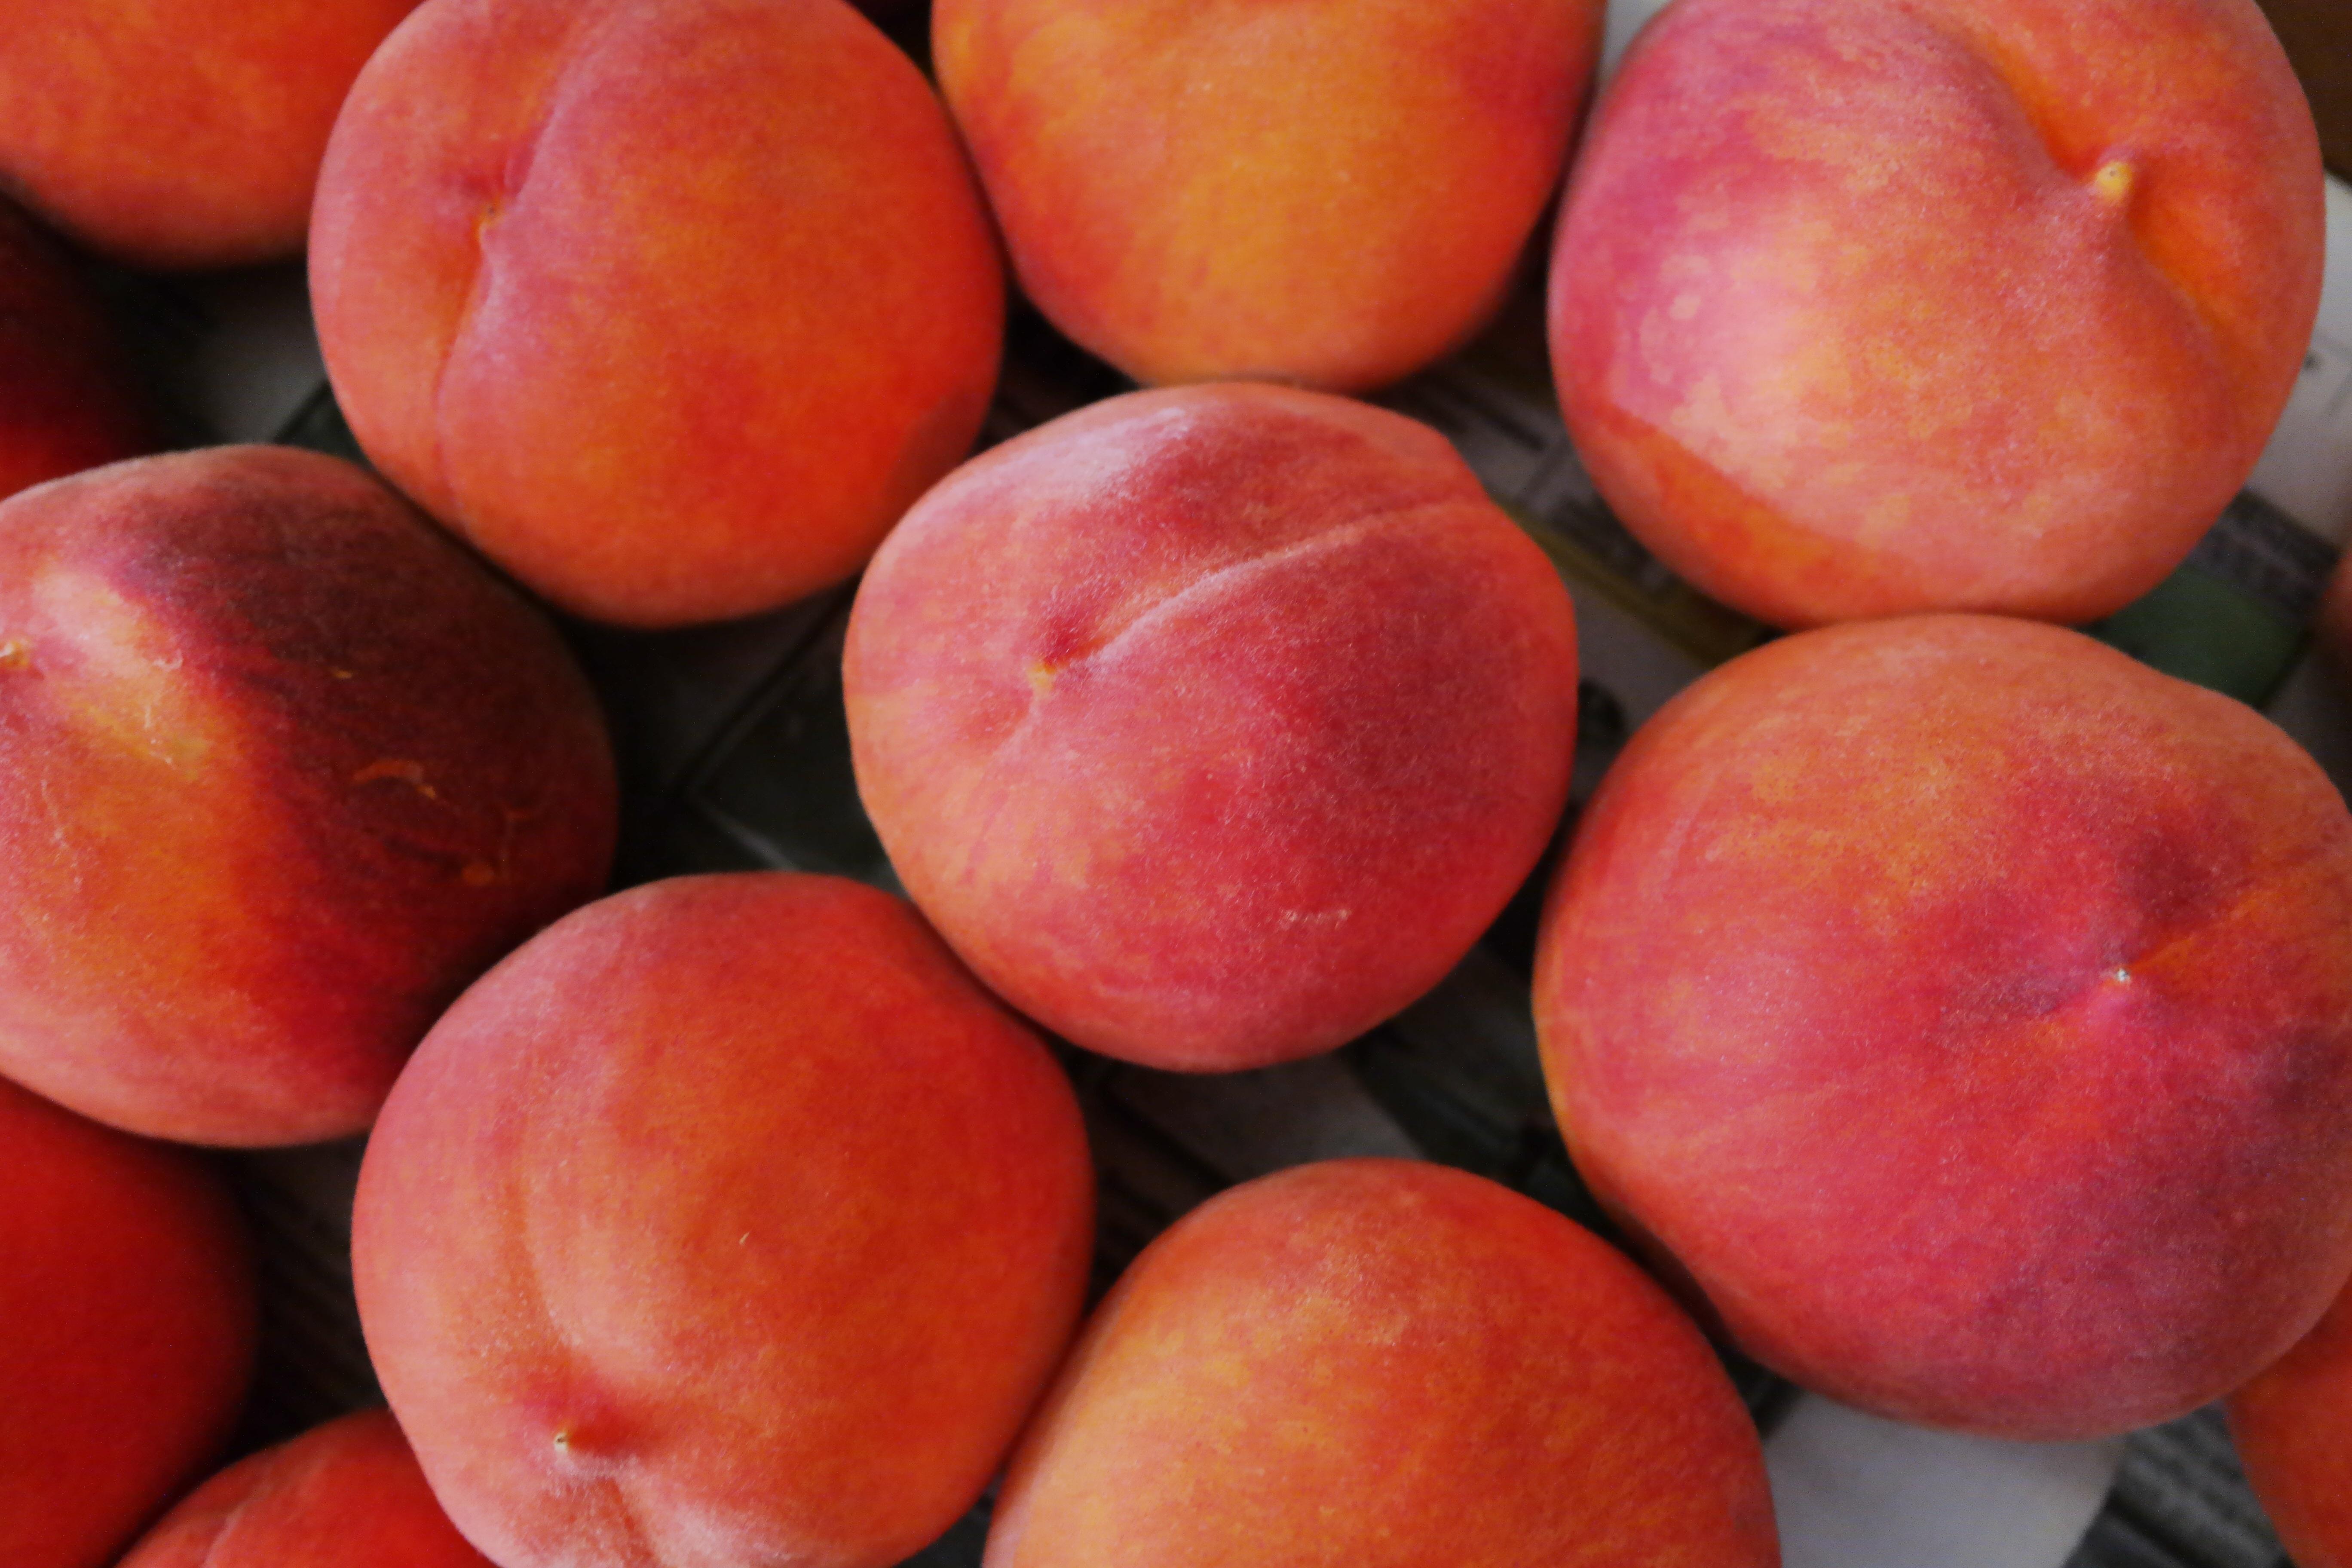 Download wallpaper 5472x3648 peaches, fruit, ripe HD background